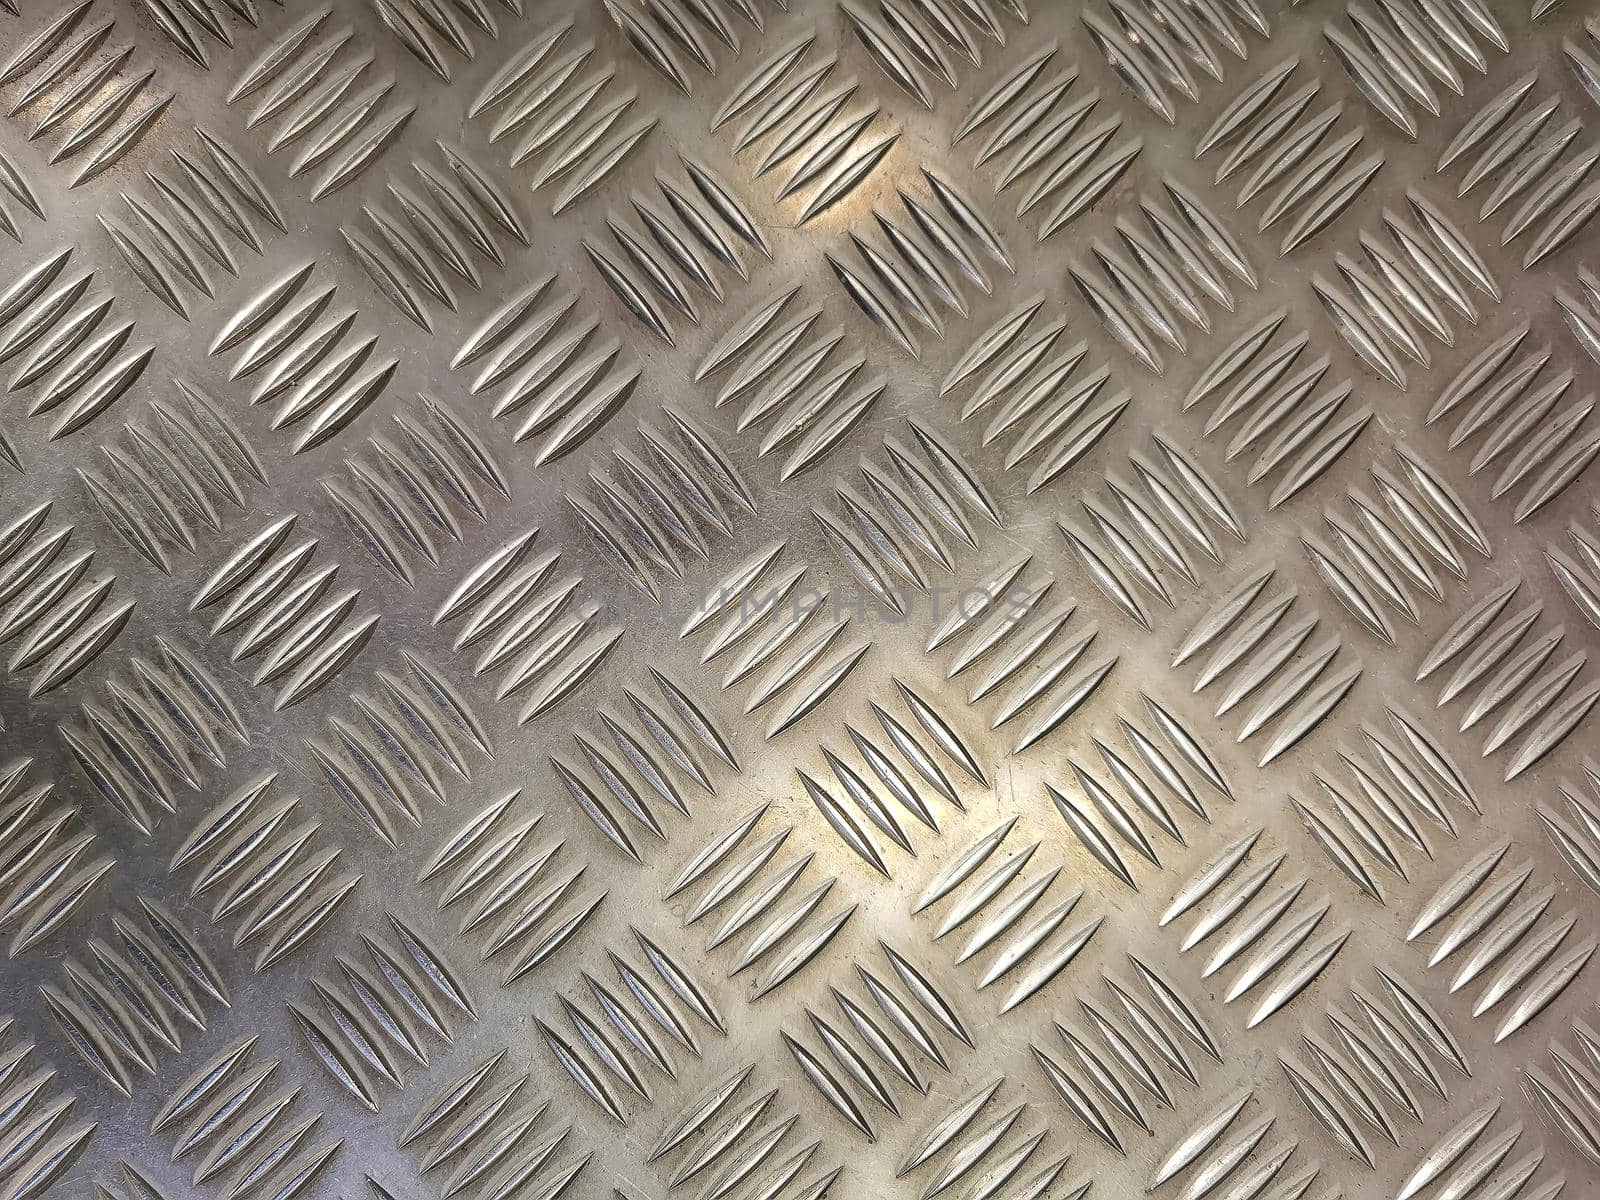 shiny metal texture with diamond pattern. stainless steel background. Industrial metal texture.  by EdVal